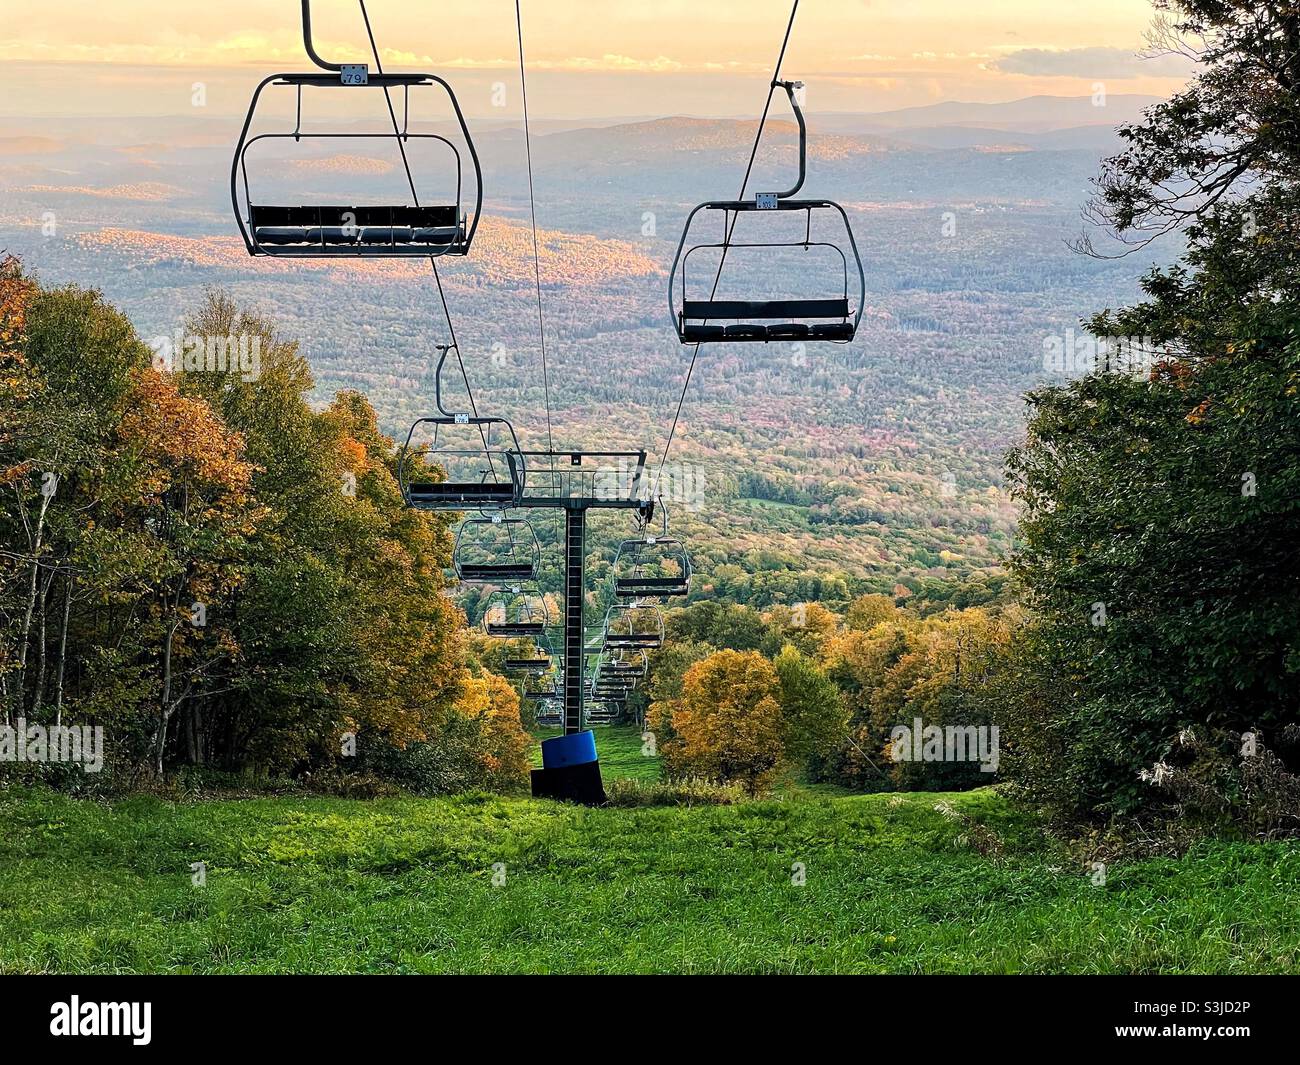 A ski lift at Bromley Mountain Resort in Winhall, Vermont sits dormant in the fall as the leaves start to change color and the state awaits the winter ski season. Stock Photo